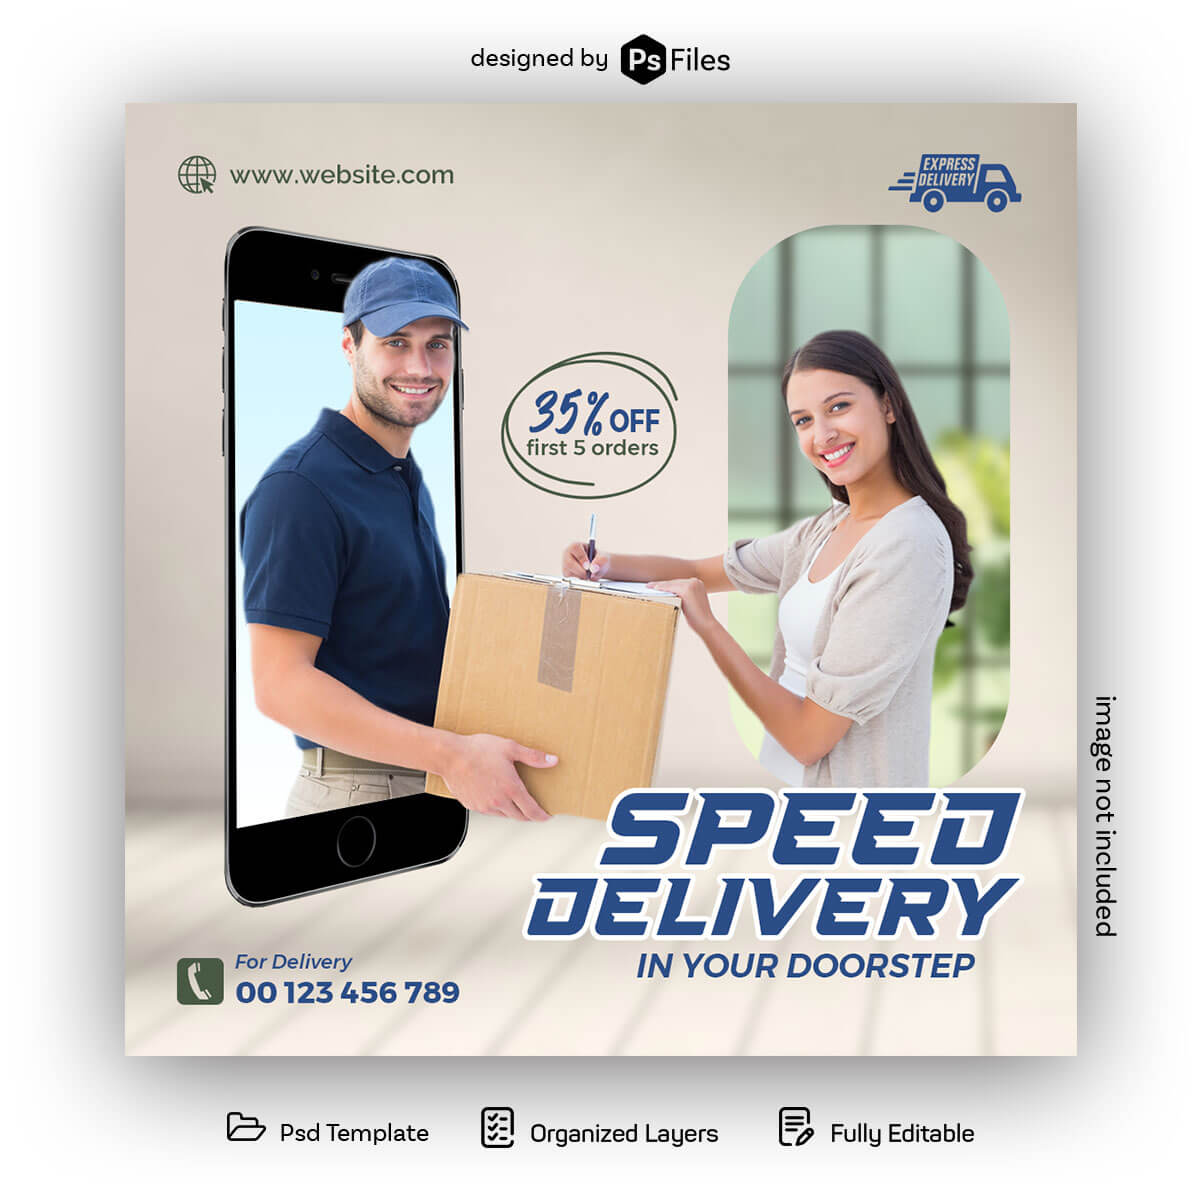 Courier and Speed Delivery Ad Post Design Free PSD Template for Social Media and Online Promos